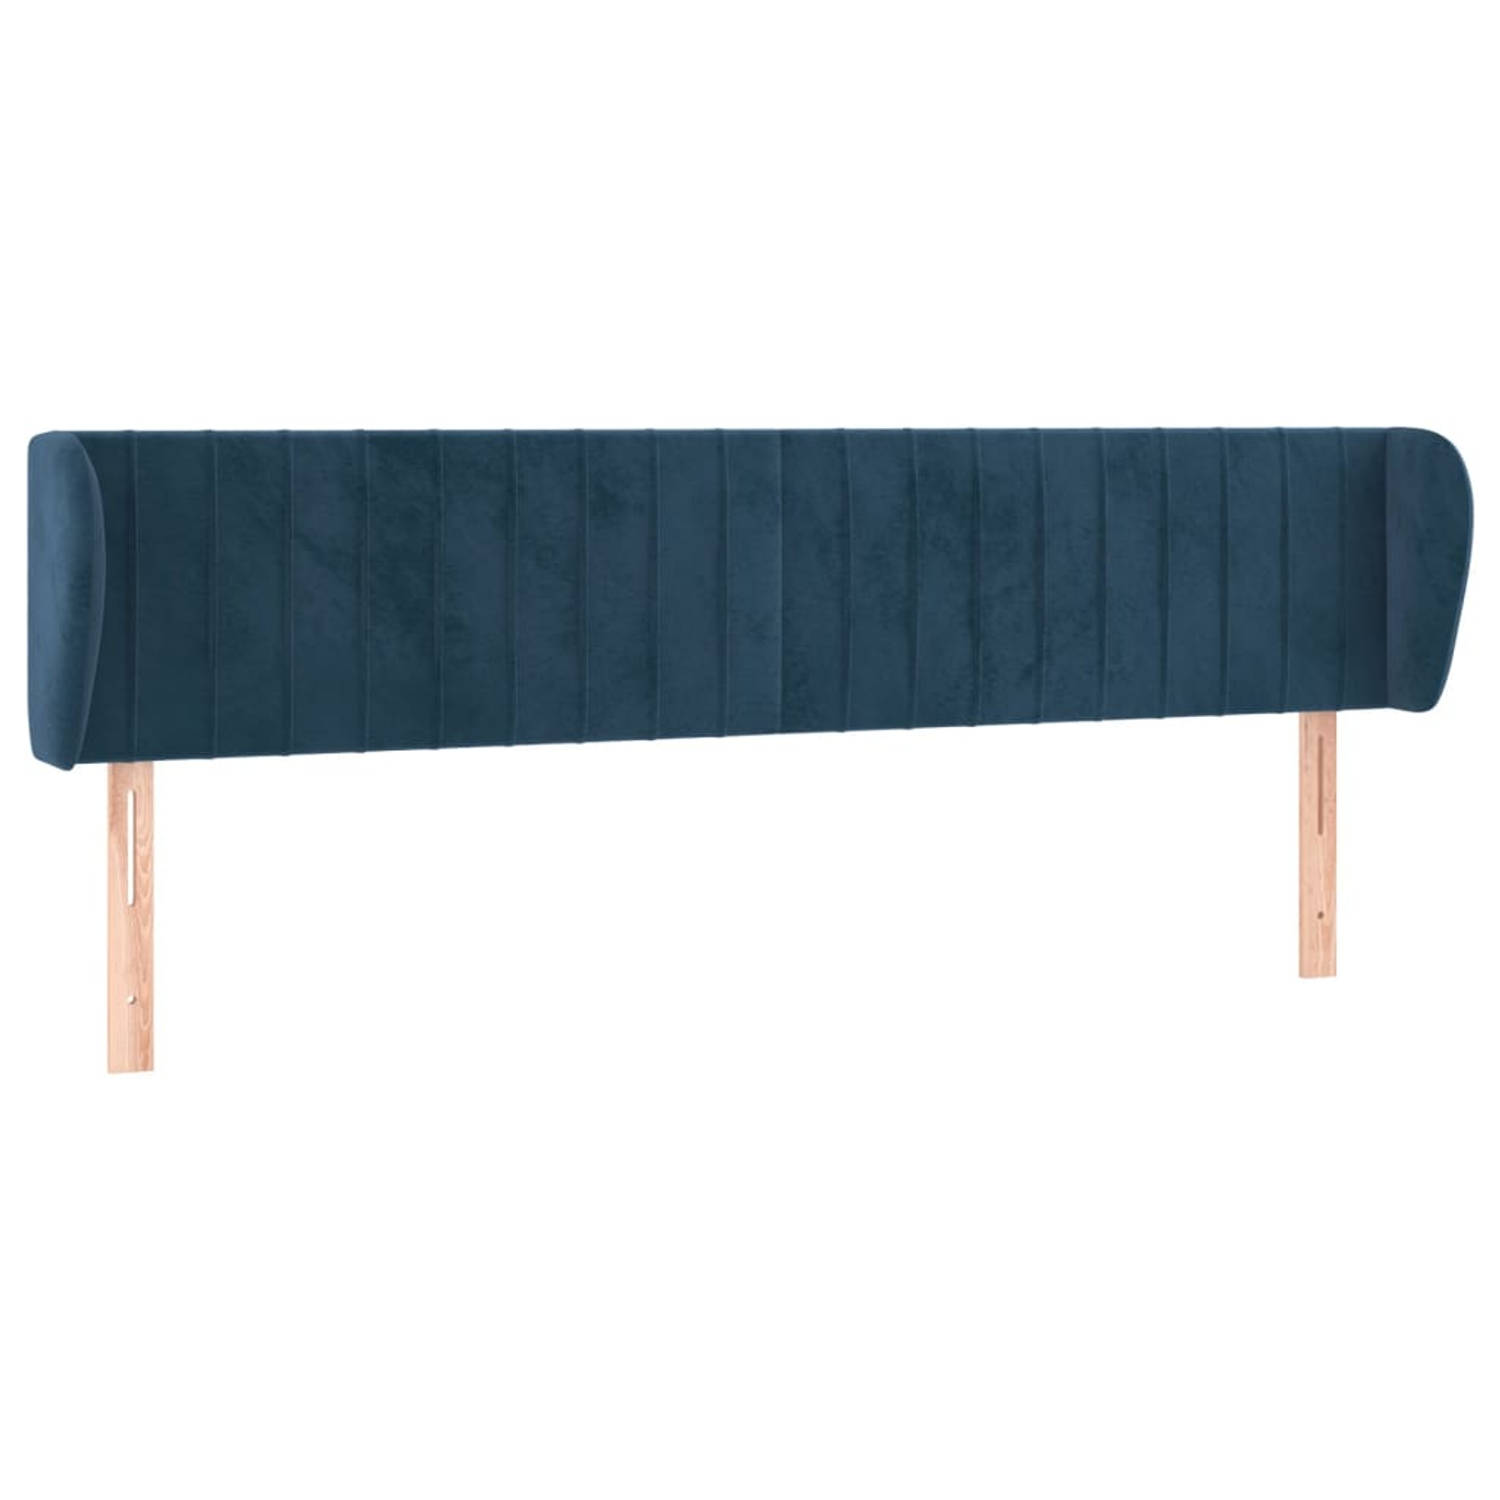 The Living Store Hoofdbord - Classic - Bedaccessoires - 183x23x78/88 cm - Donkerblauw